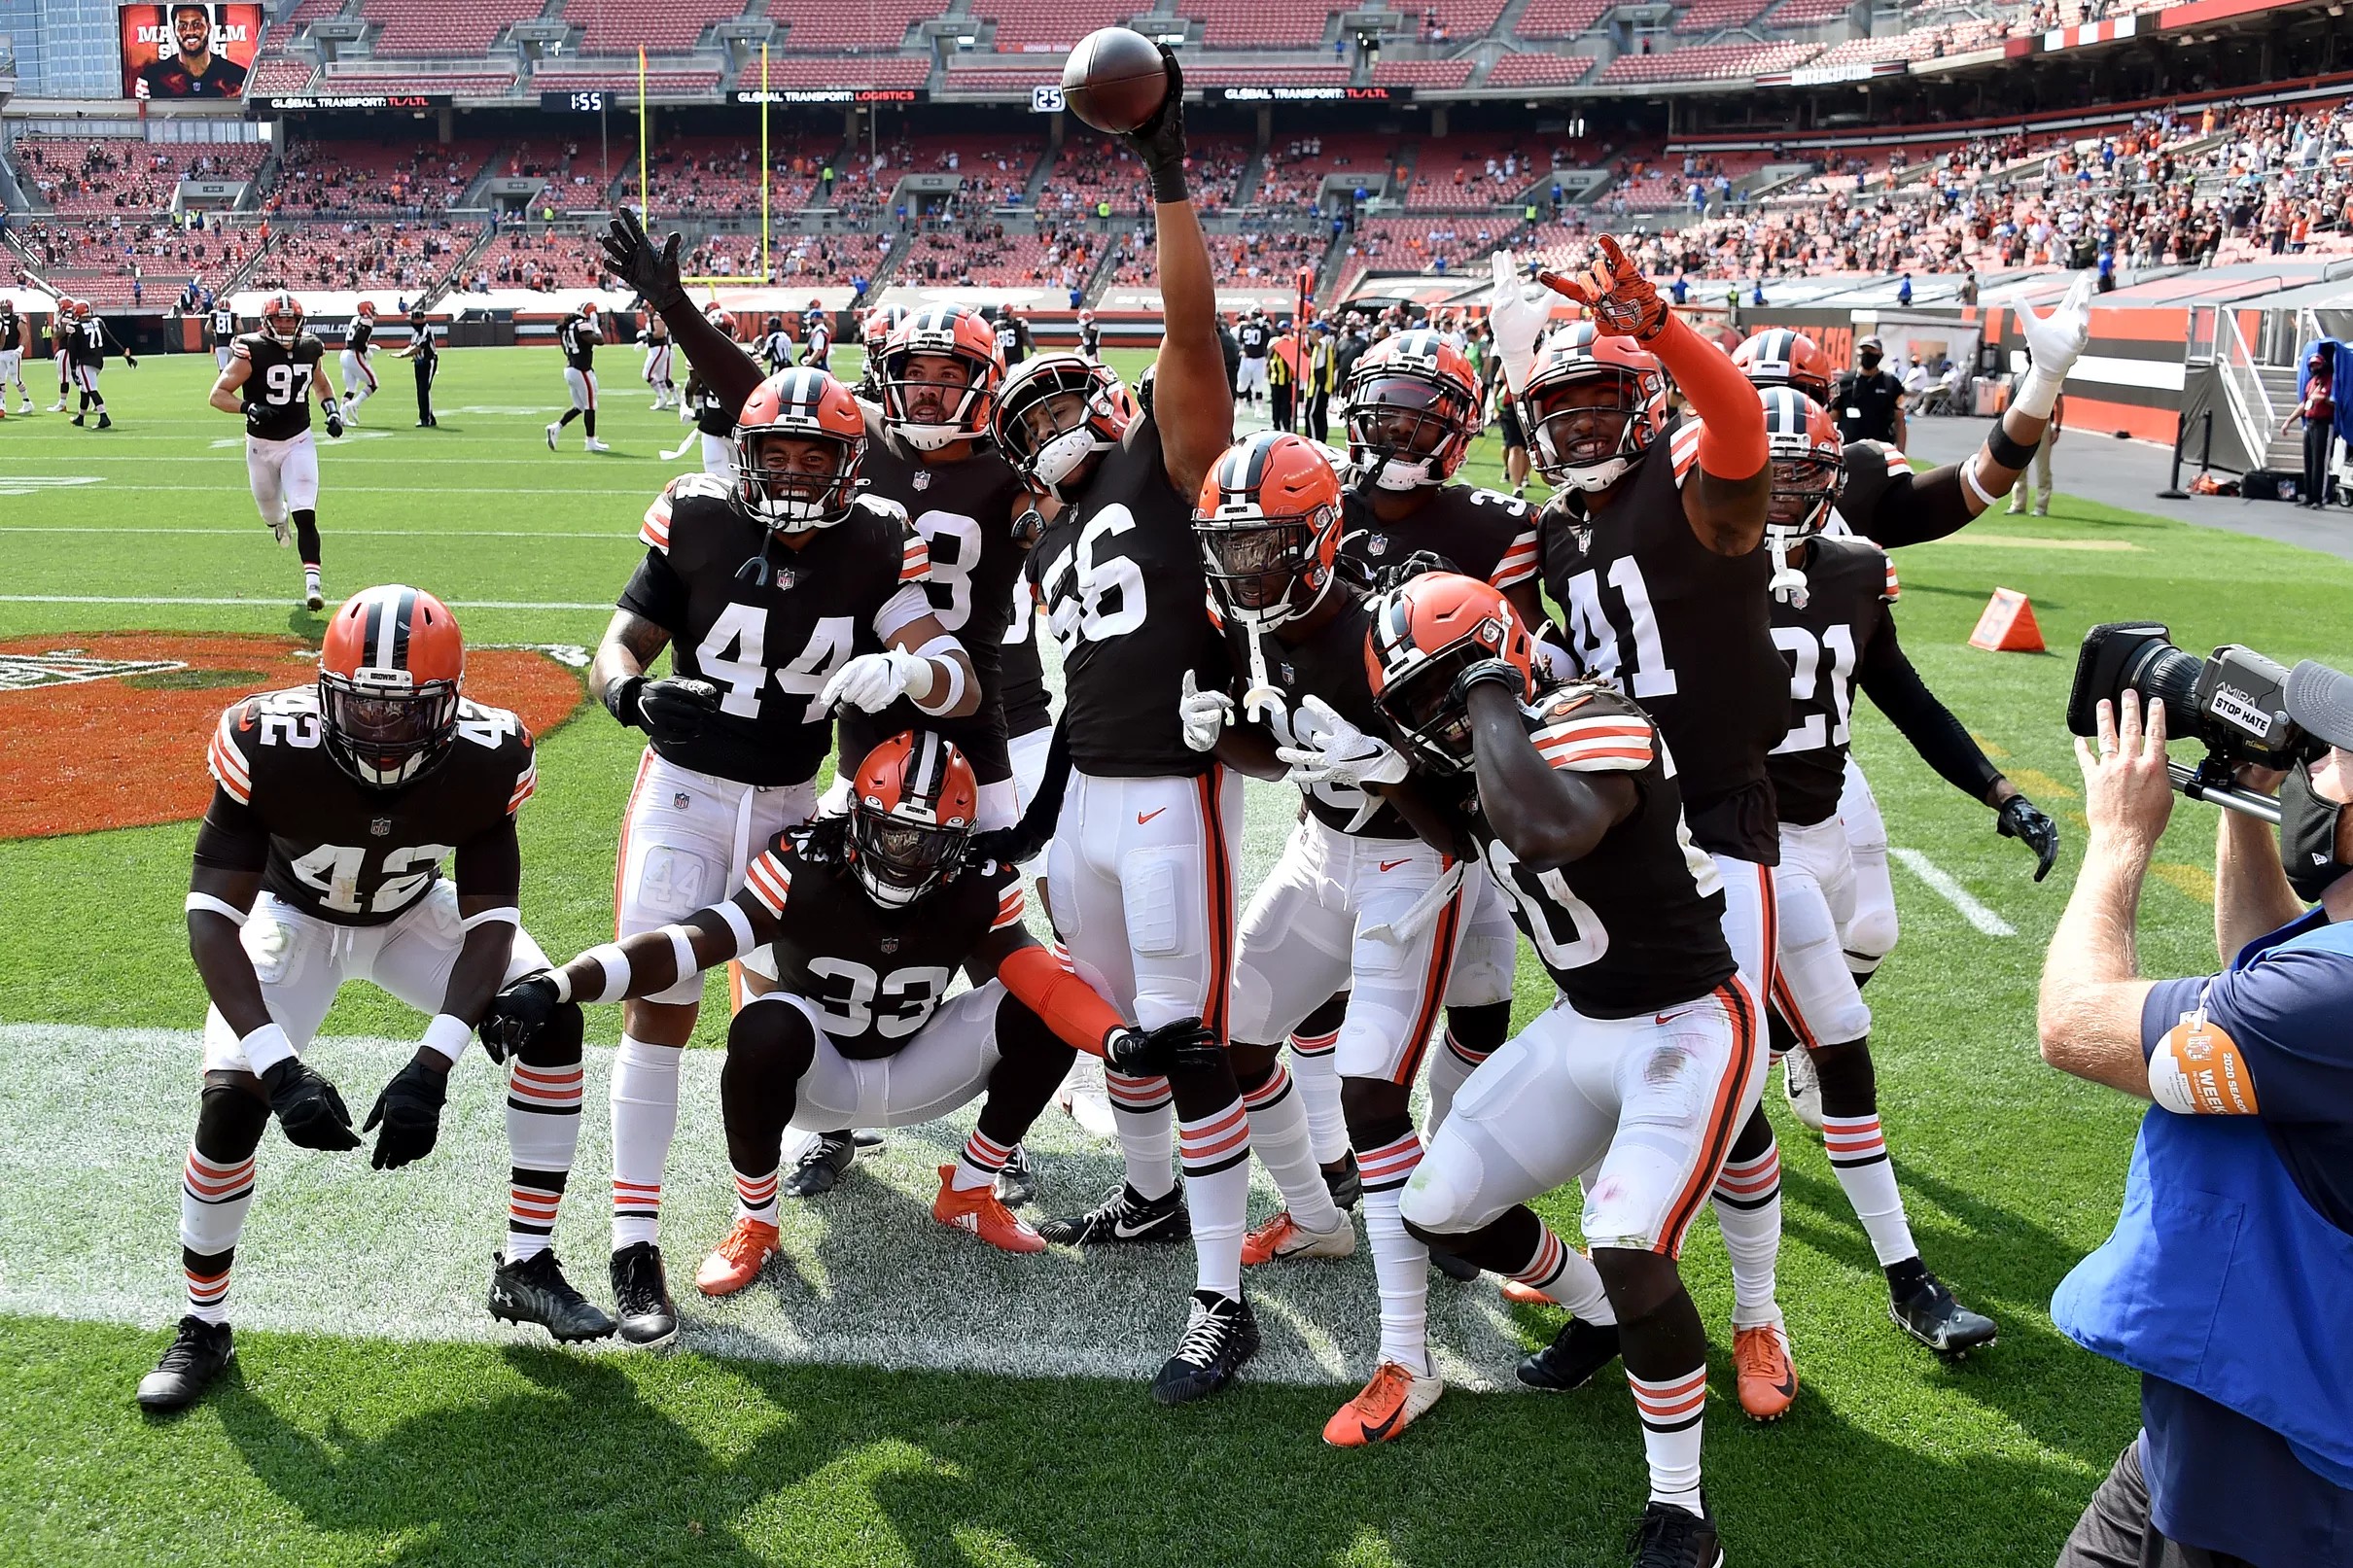 Browns vs. Football Team Final Score Cleveland forces 5 turnovers